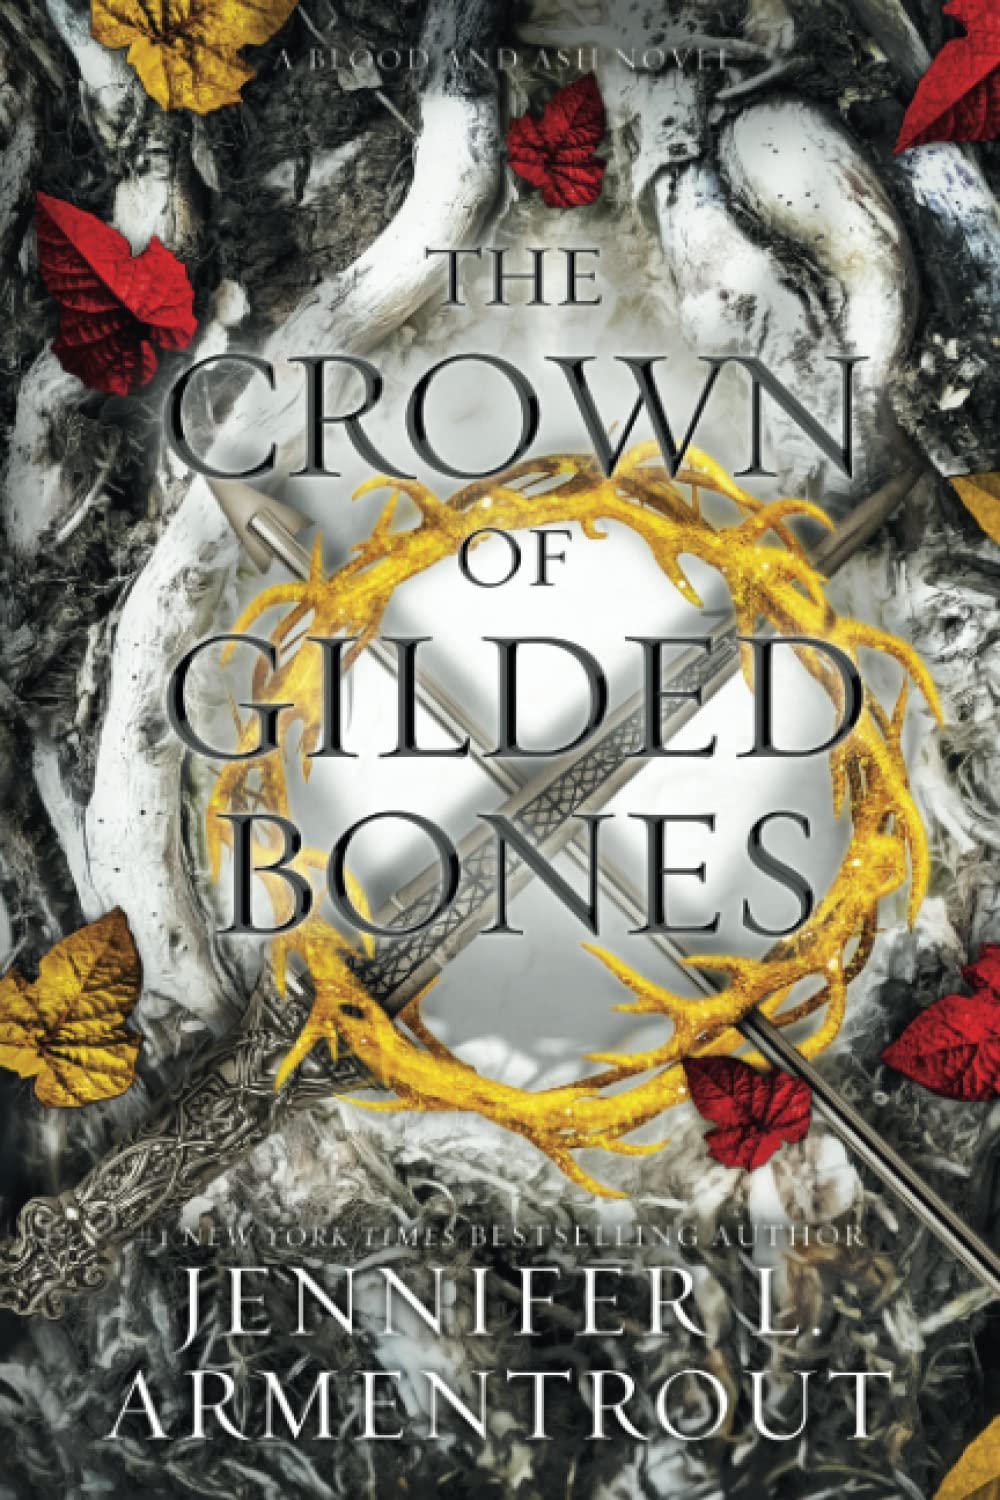 The Crown of Gilded Bones by Armentrout, Jennifer L.